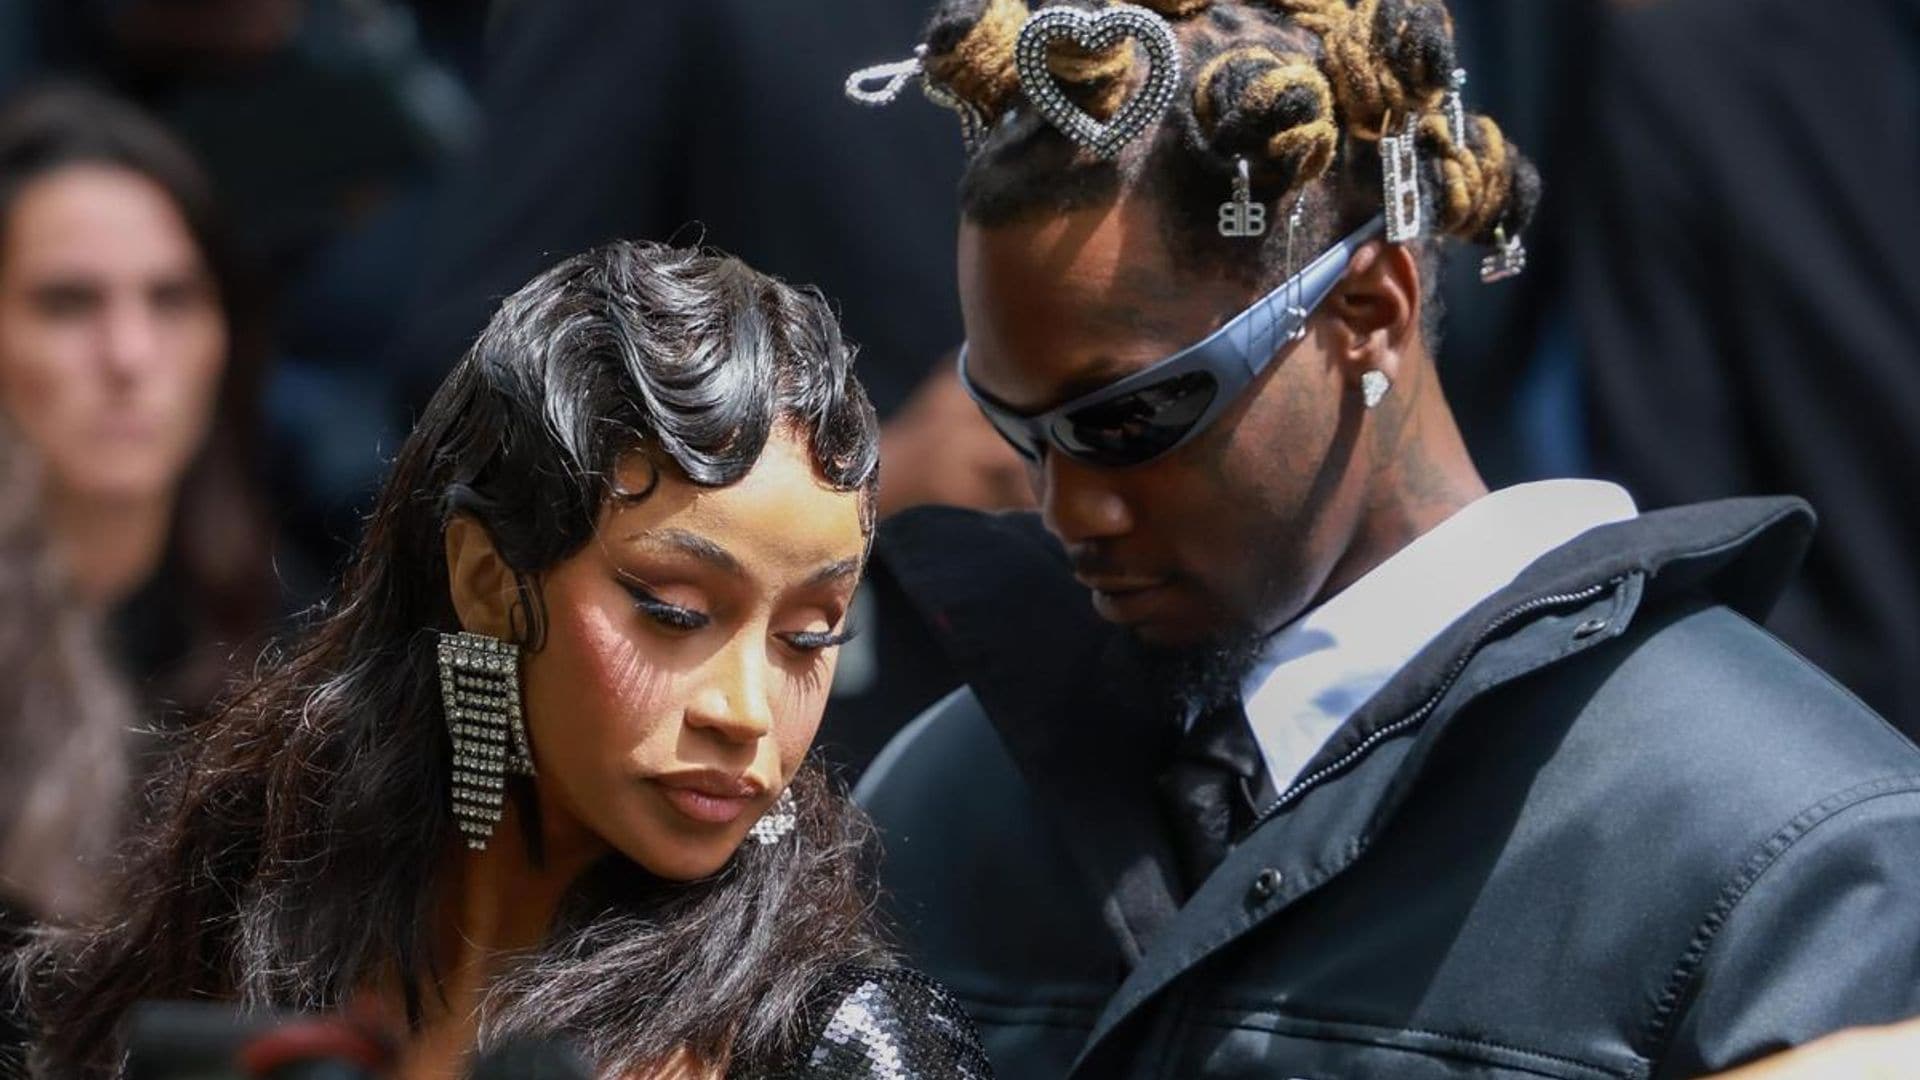 Cardi B spent Valentine’s Day with Offset despite recent split: Are they back together?